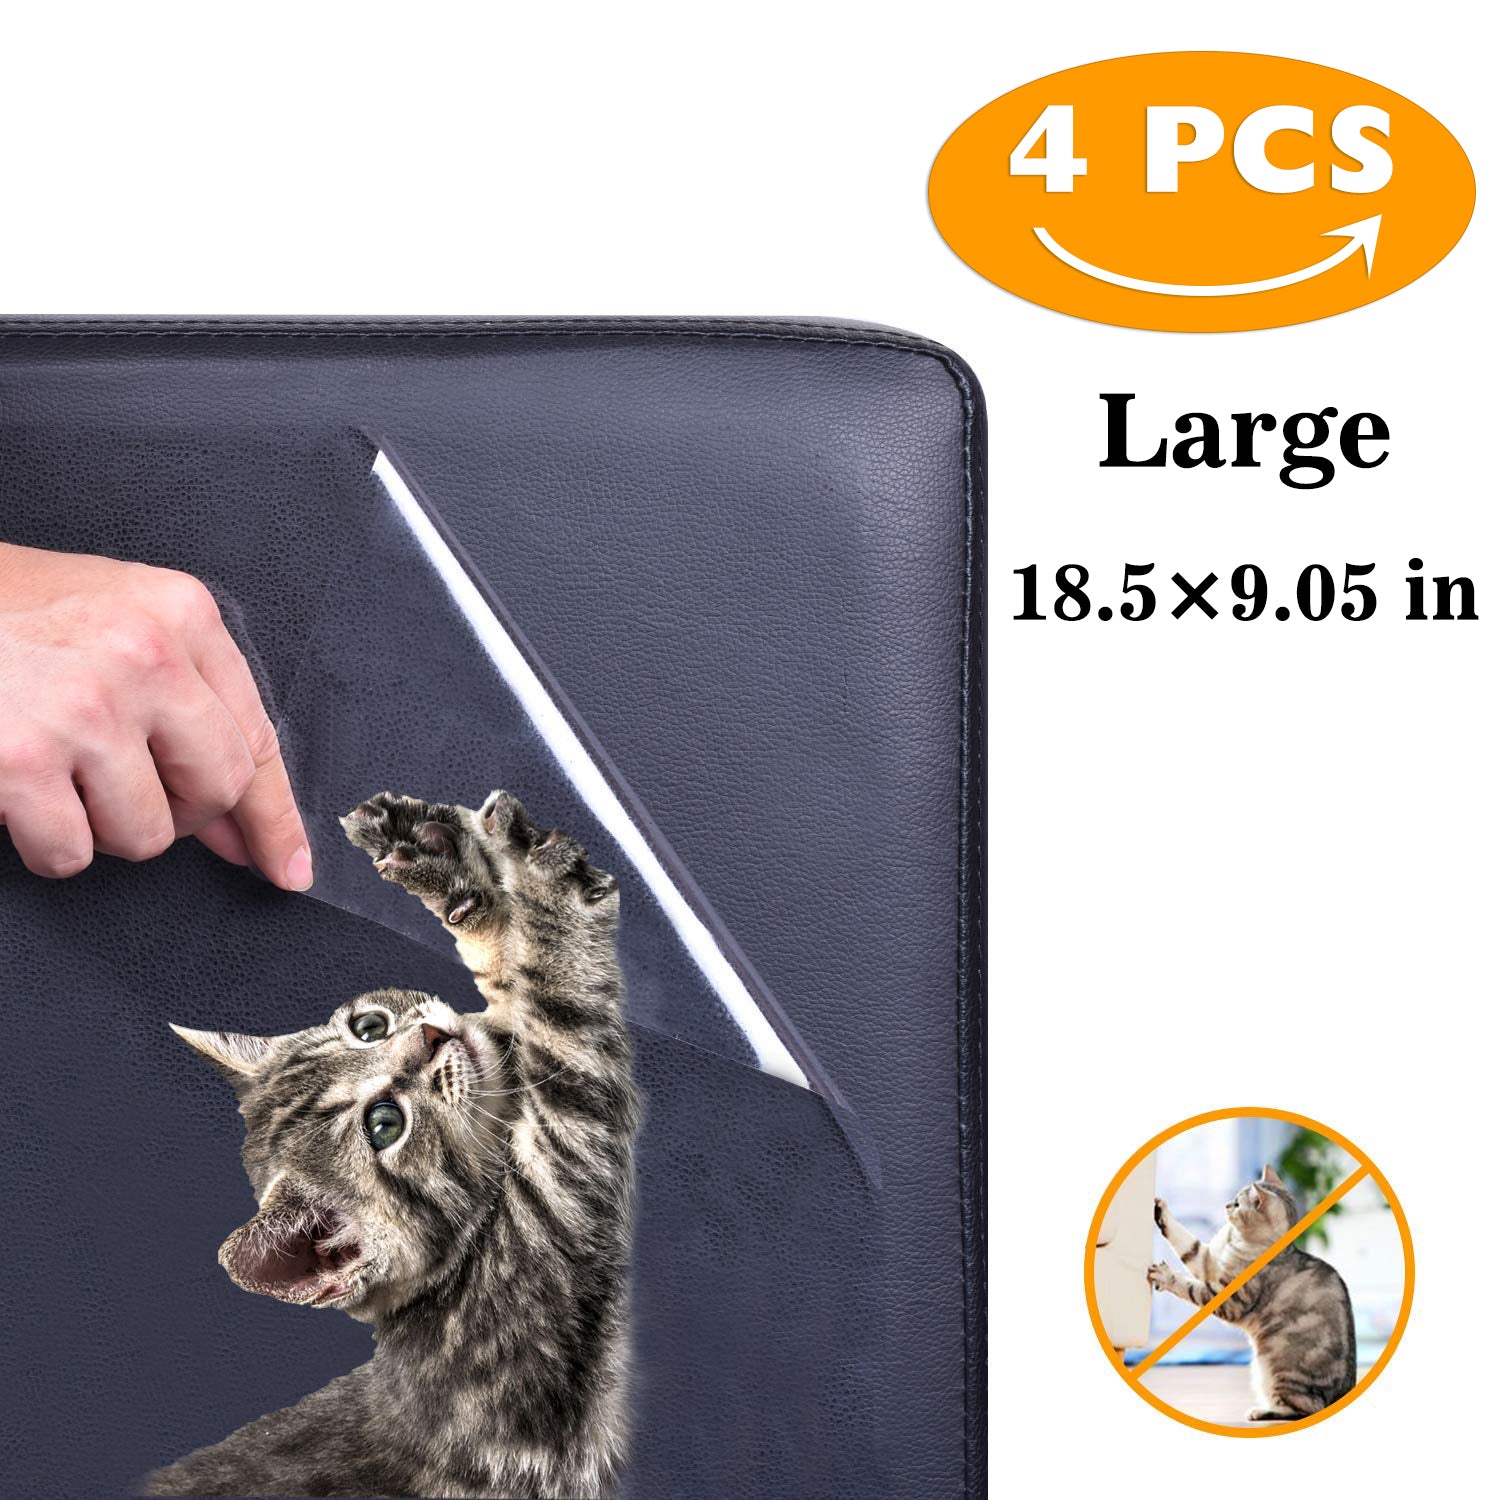 New Upgrade - 4PCS Large (18.5 X9.05Inch) Furniture Defender Cat Scratching Guard, Furniture Protectors from Pets, anti Cat Scratch Deterrent, Claw Proof Pads for Door Animals & Pet Supplies > Pet Supplies > Cat Supplies > Cat Furniture Lnkoo   